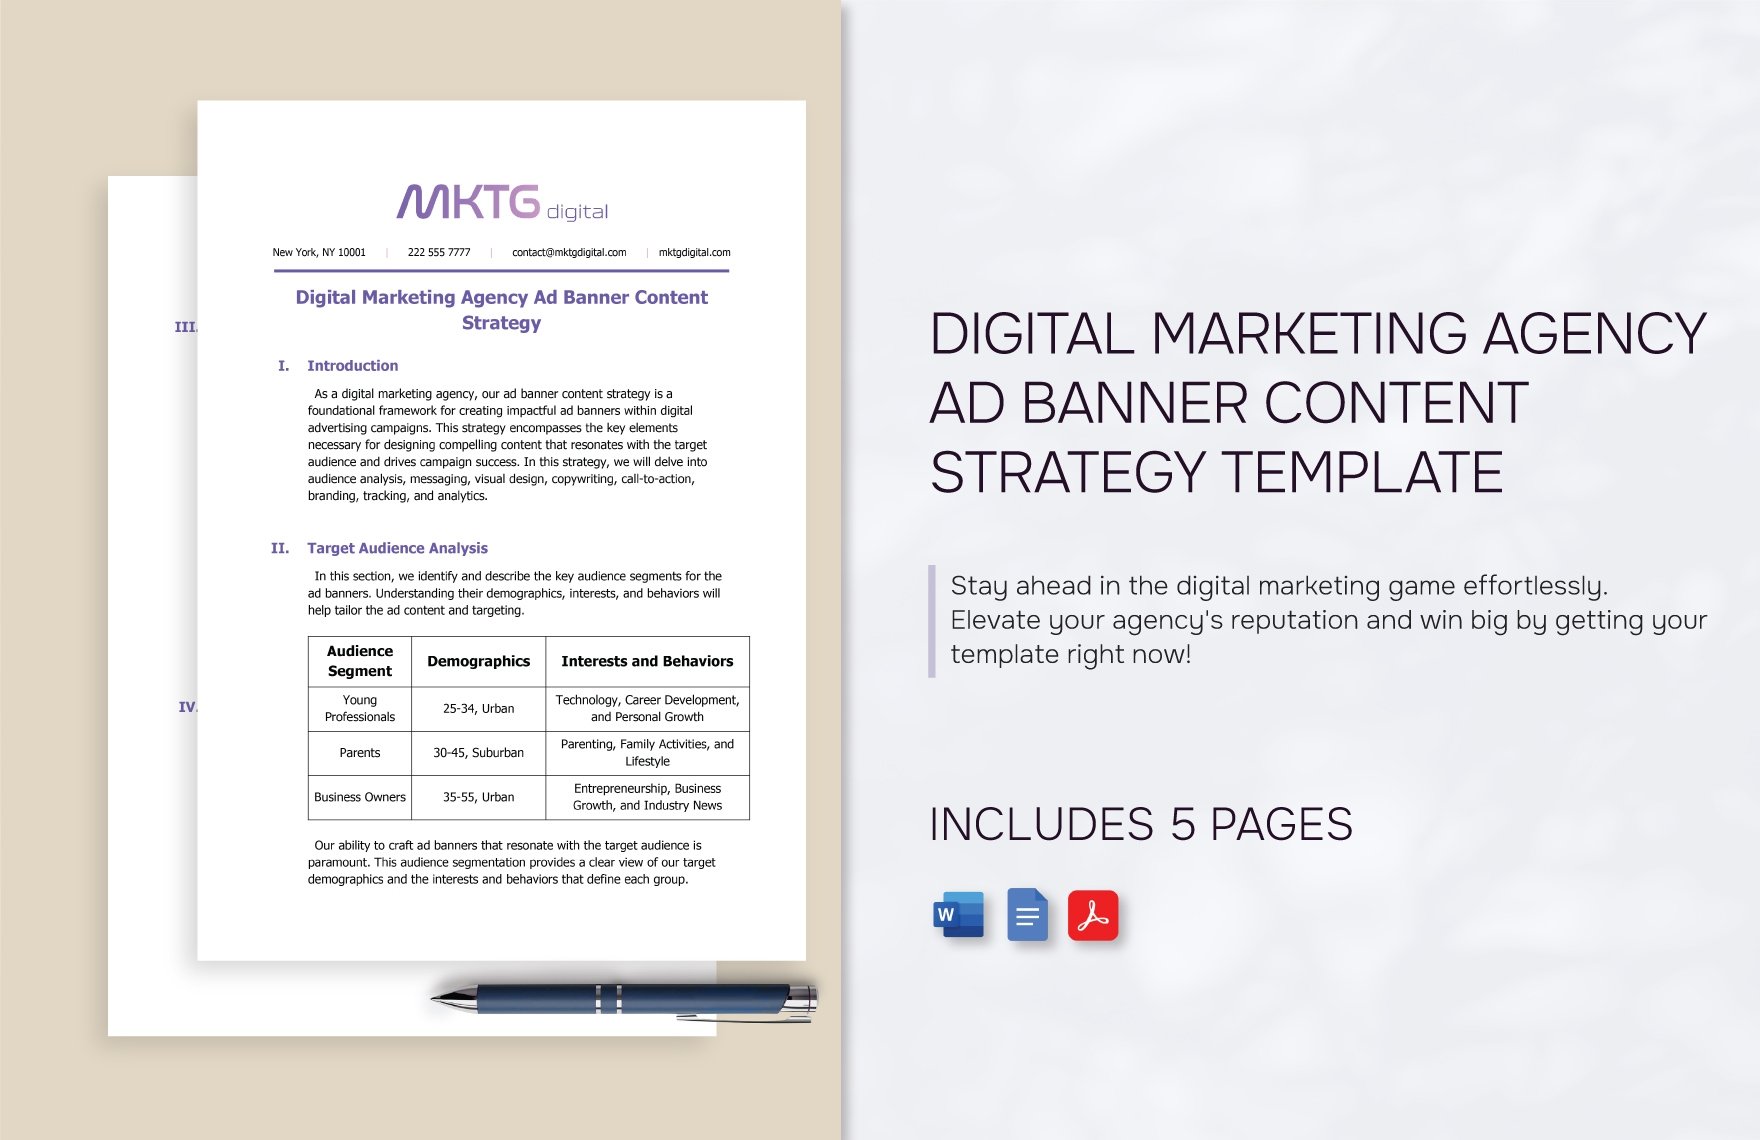 Digital Marketing Agency Ad Banner Content Strategy Template